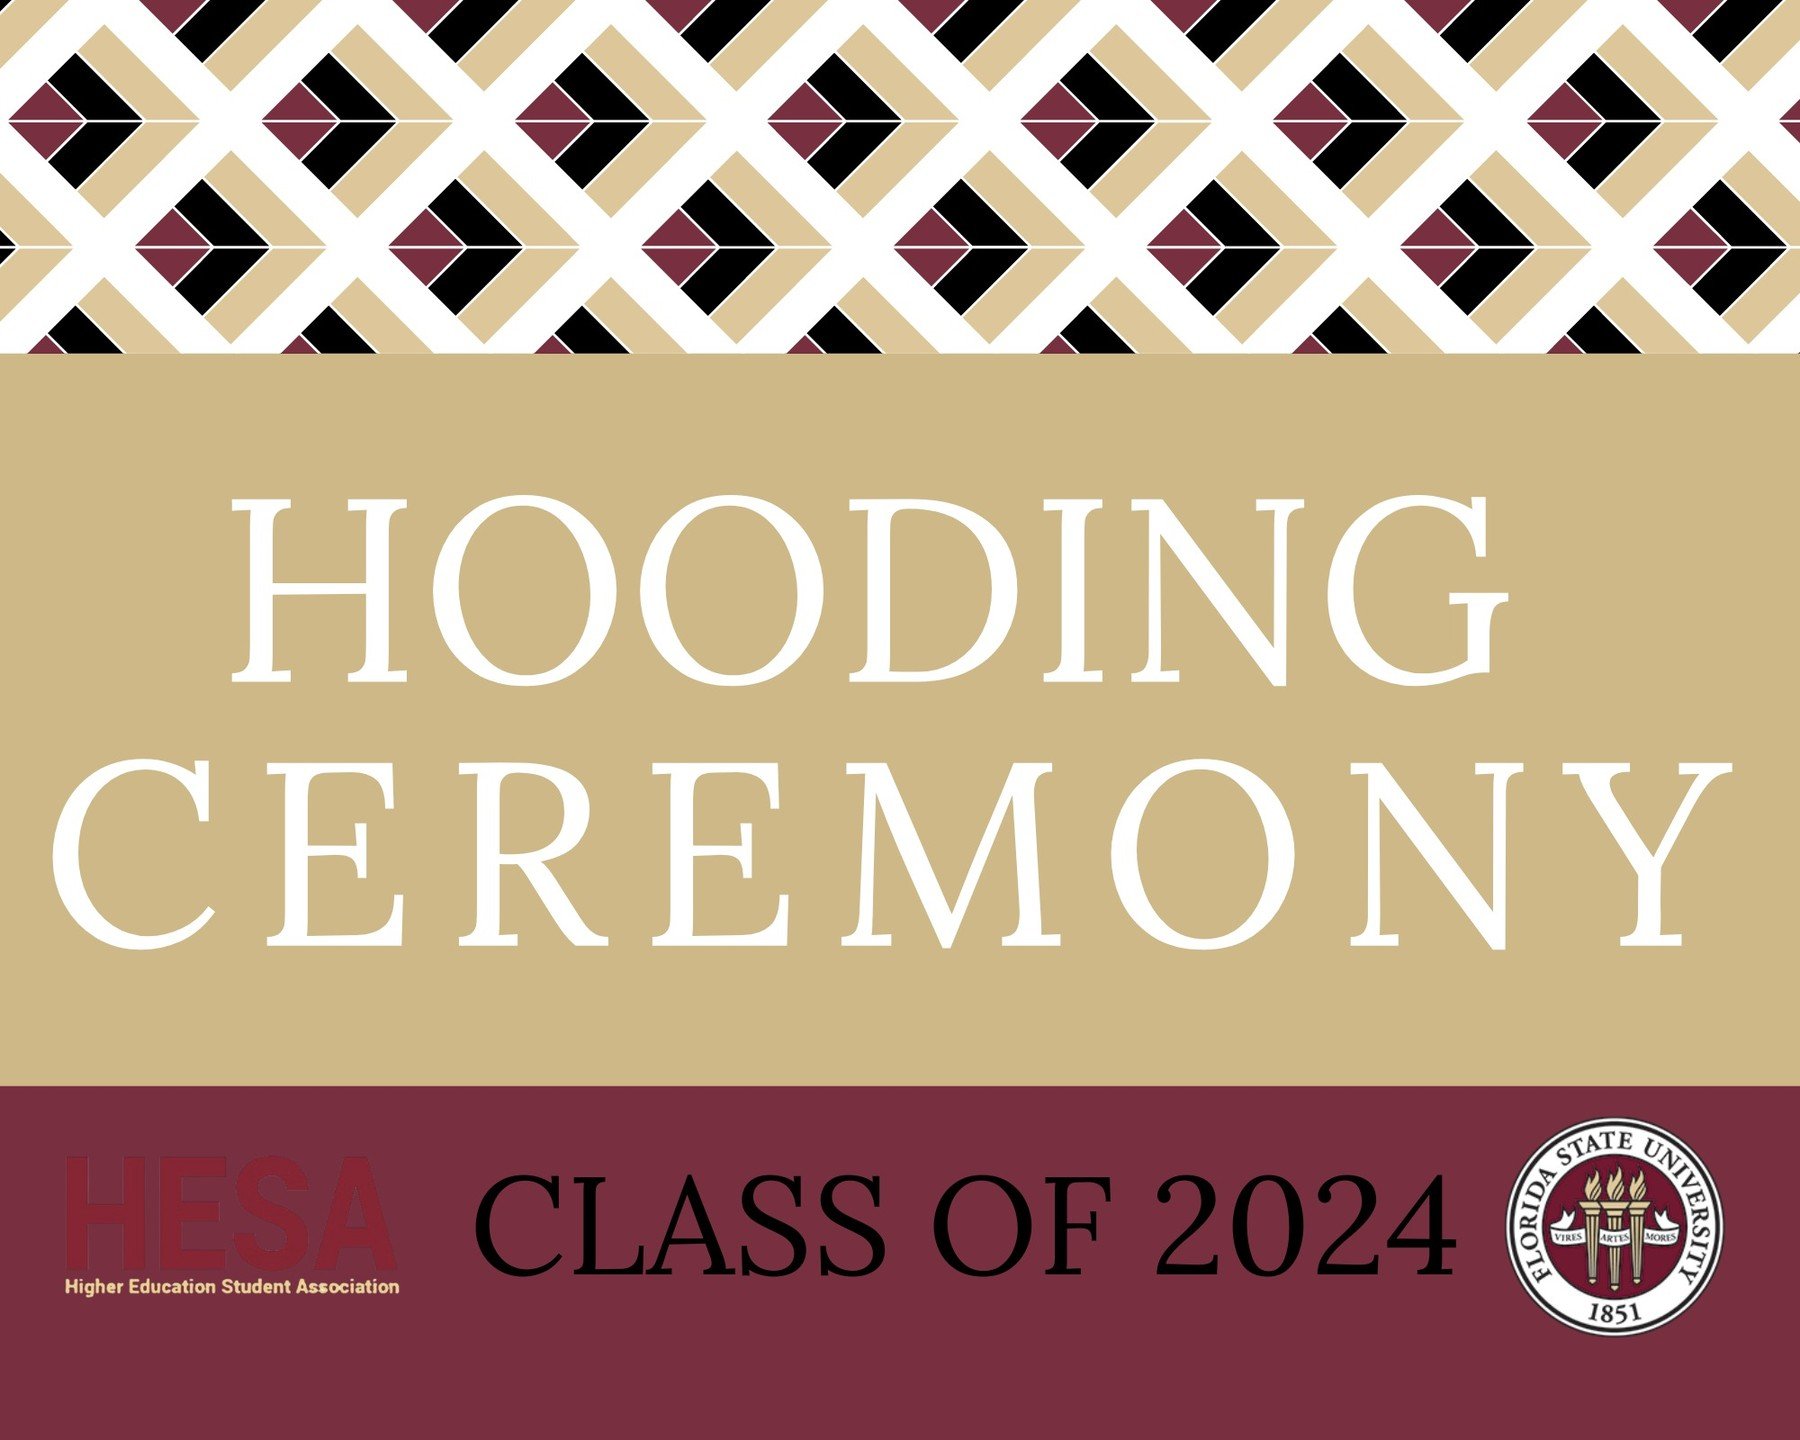 📝Years of research, late nights, and endless dedication have culminated in this moment. Here's to shaping a brighter future for higher education! #CEHHSGrads #PhdLife #HESA #FSUHESA